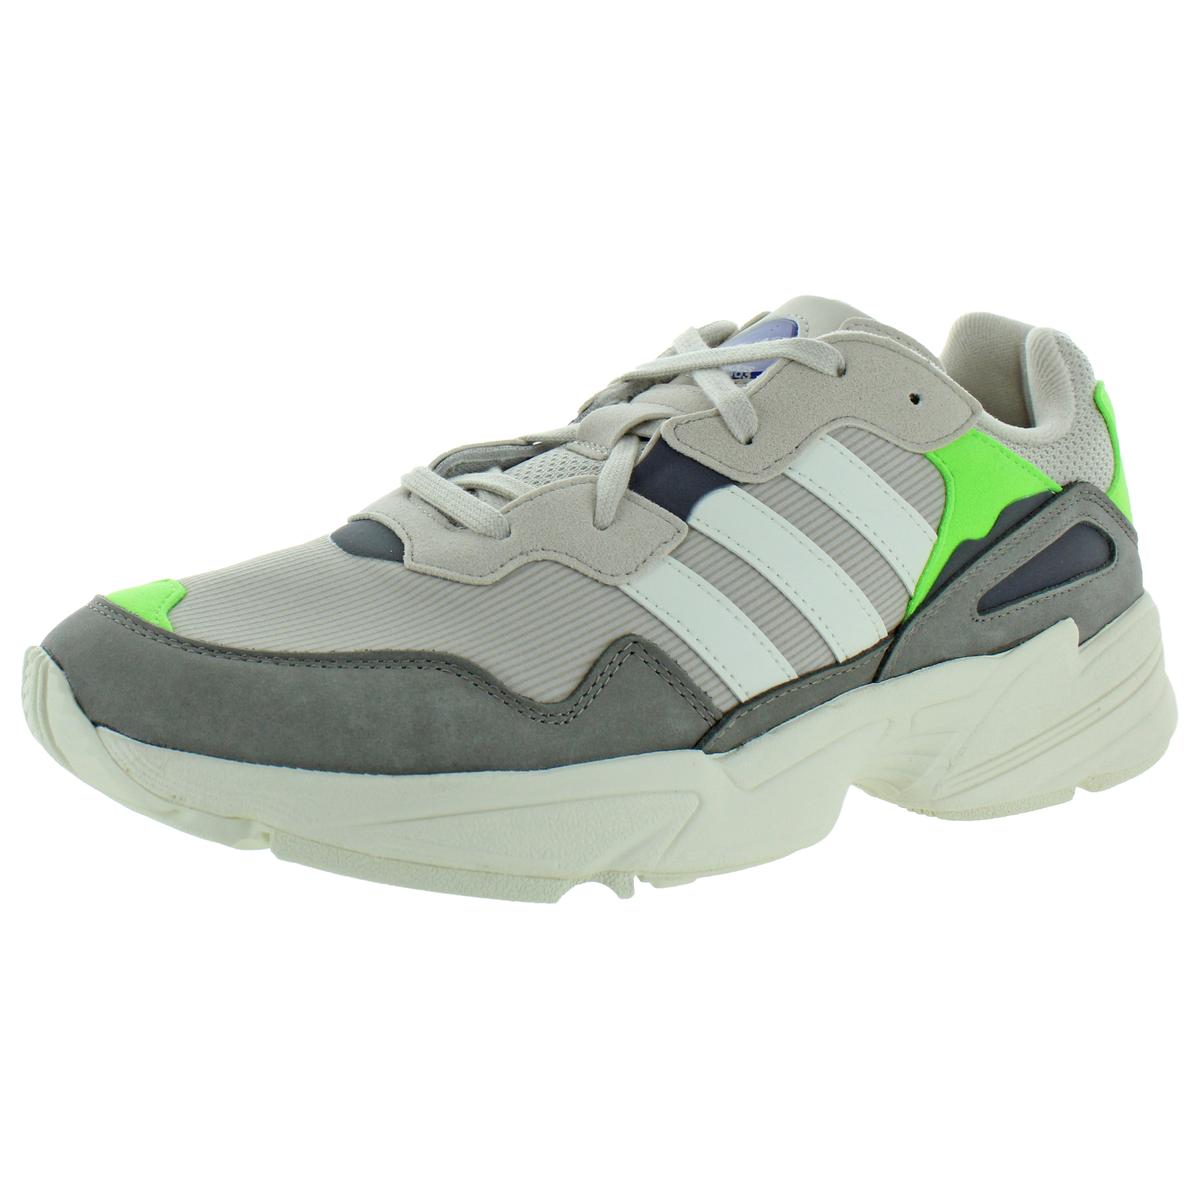 Outgoing Bat Ampere Adidas Yung-96 Mens Lifestyle Athleisure Fashion Sneakers